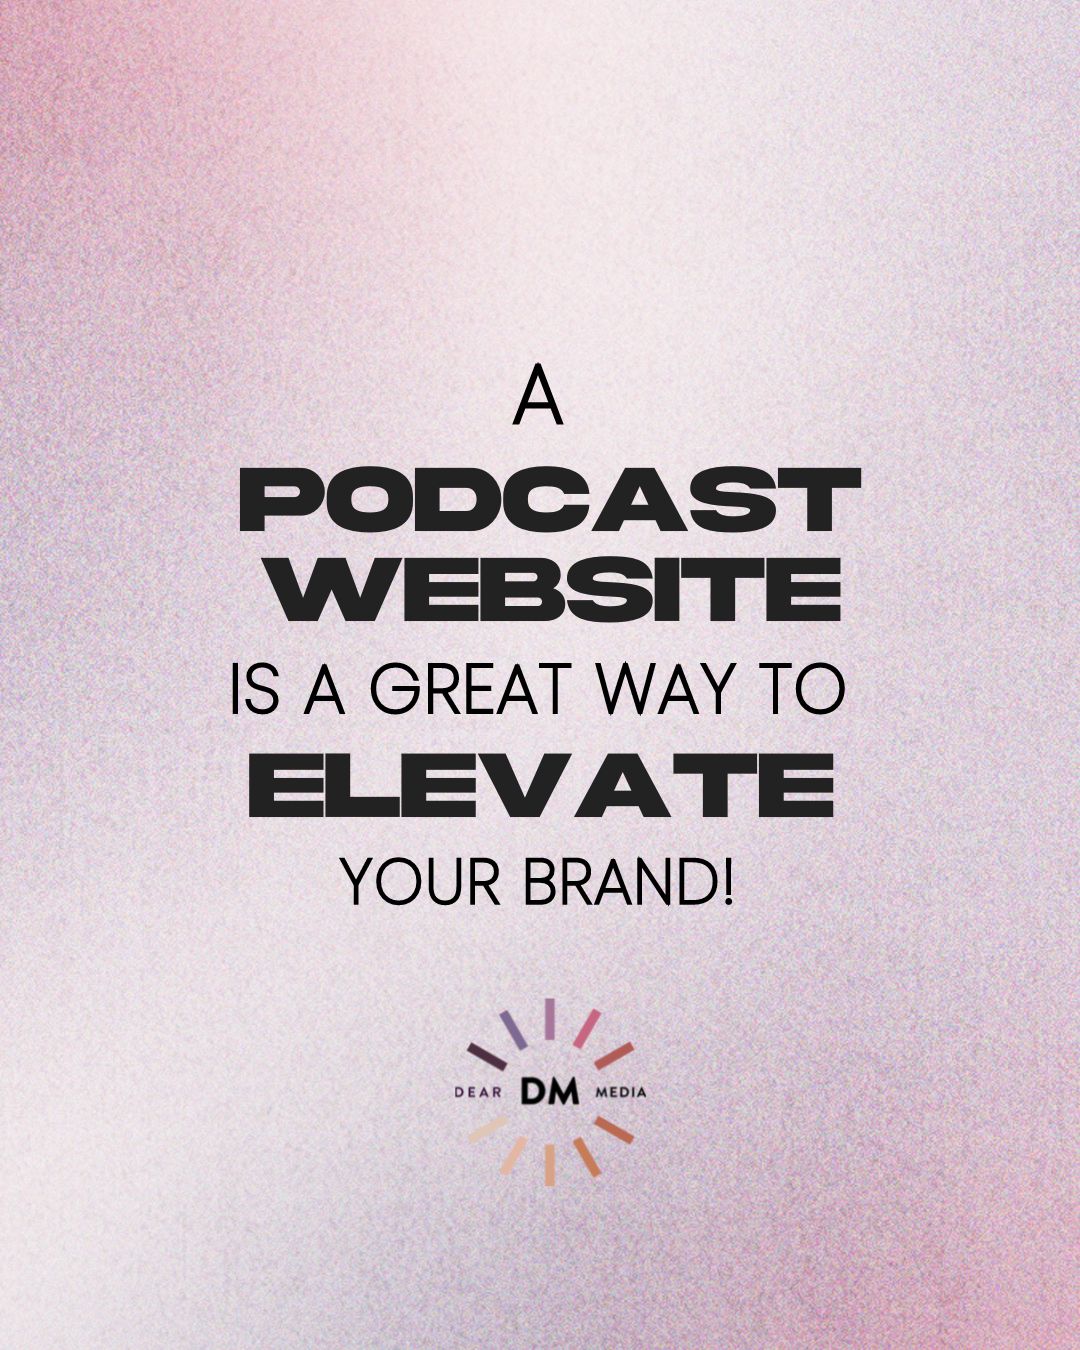 A podcast website is a great way to elevate your brand written in black bold with a pink background